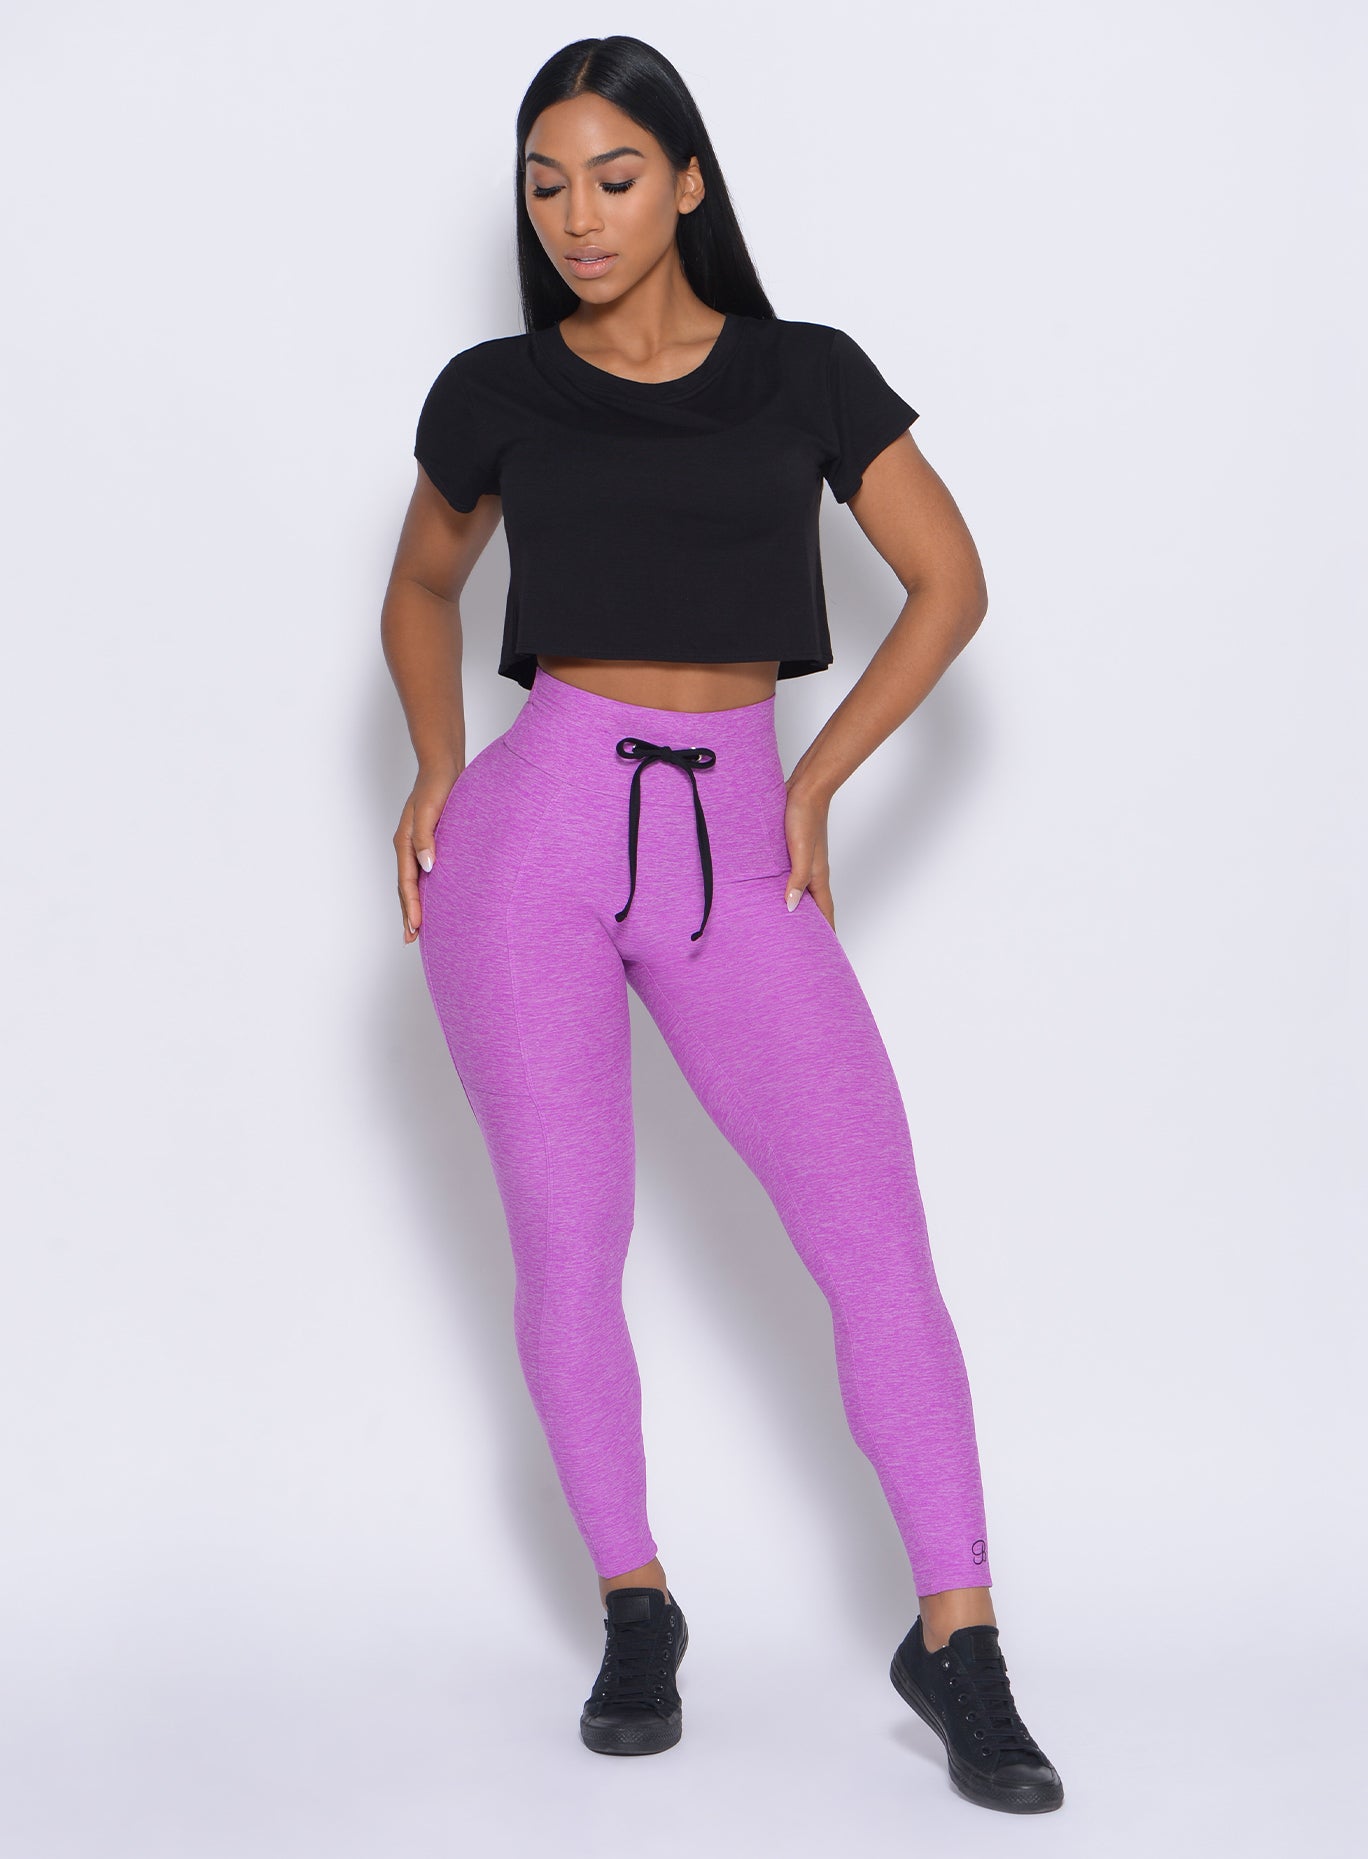 Front profile view of the model with her hands on  waist wearing our thrive leggings in purple and a black top